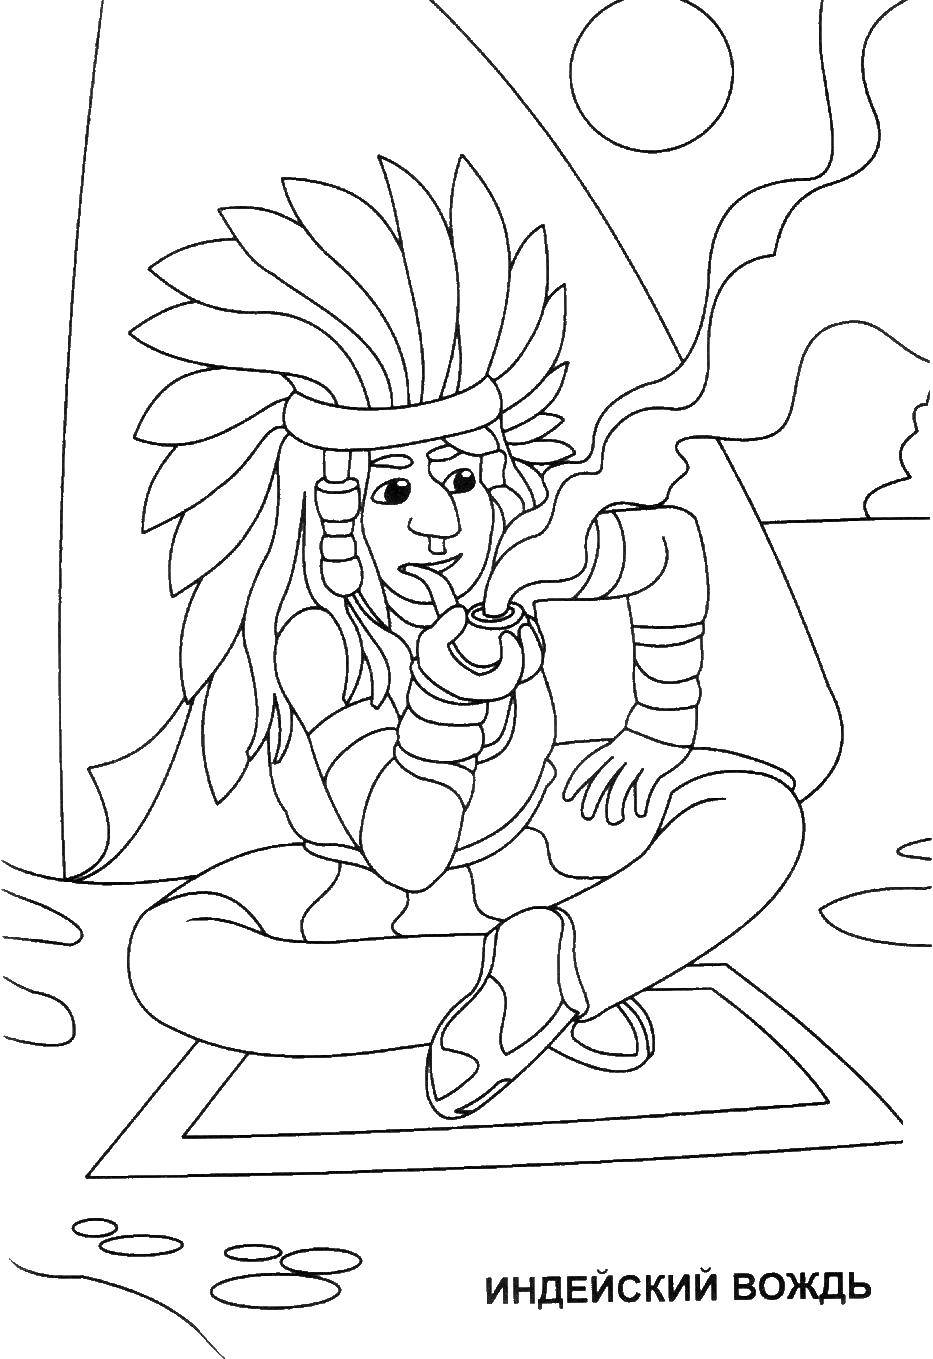 Coloring The leader of the Indians. Category Knights . Tags:  the leader of the Indians.